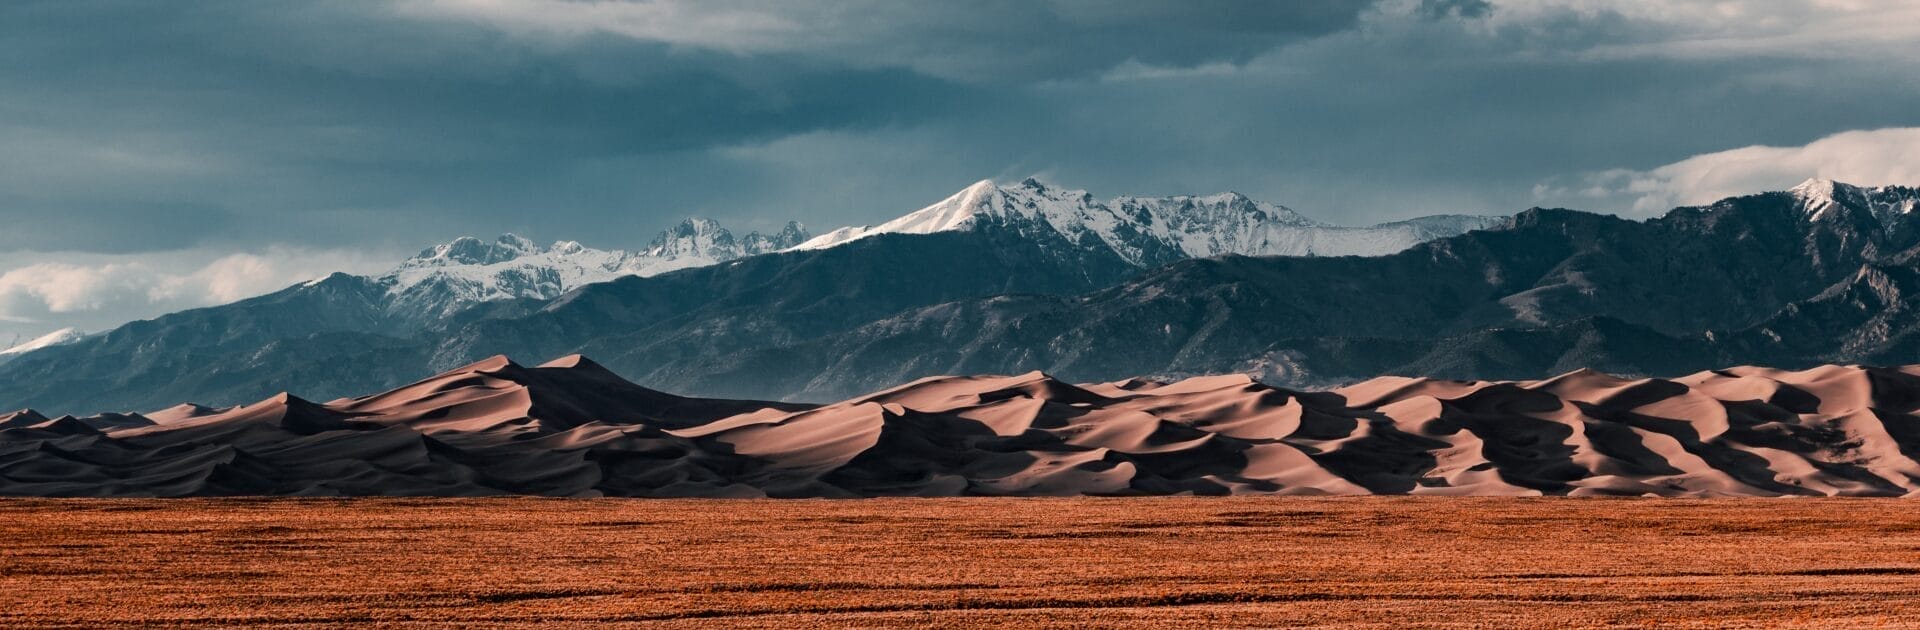 
		Landscape image of a sandy desert with shadowy mountains in the background.		